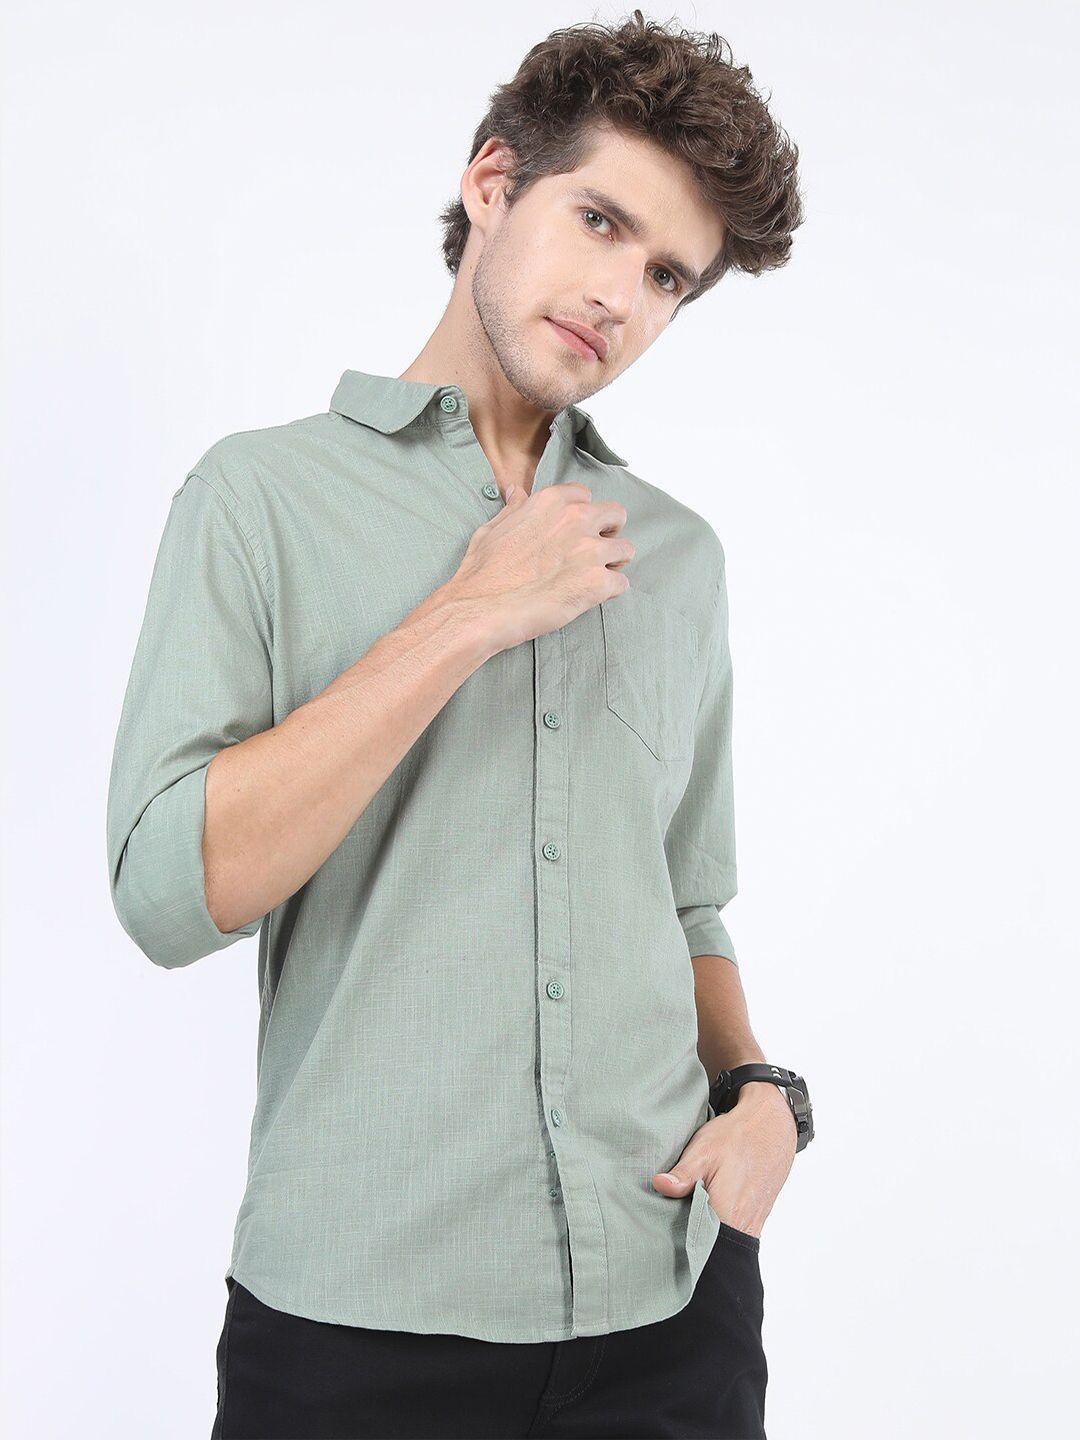 KETCH Men Olive Green Solid Slim Fit Casual Shirt